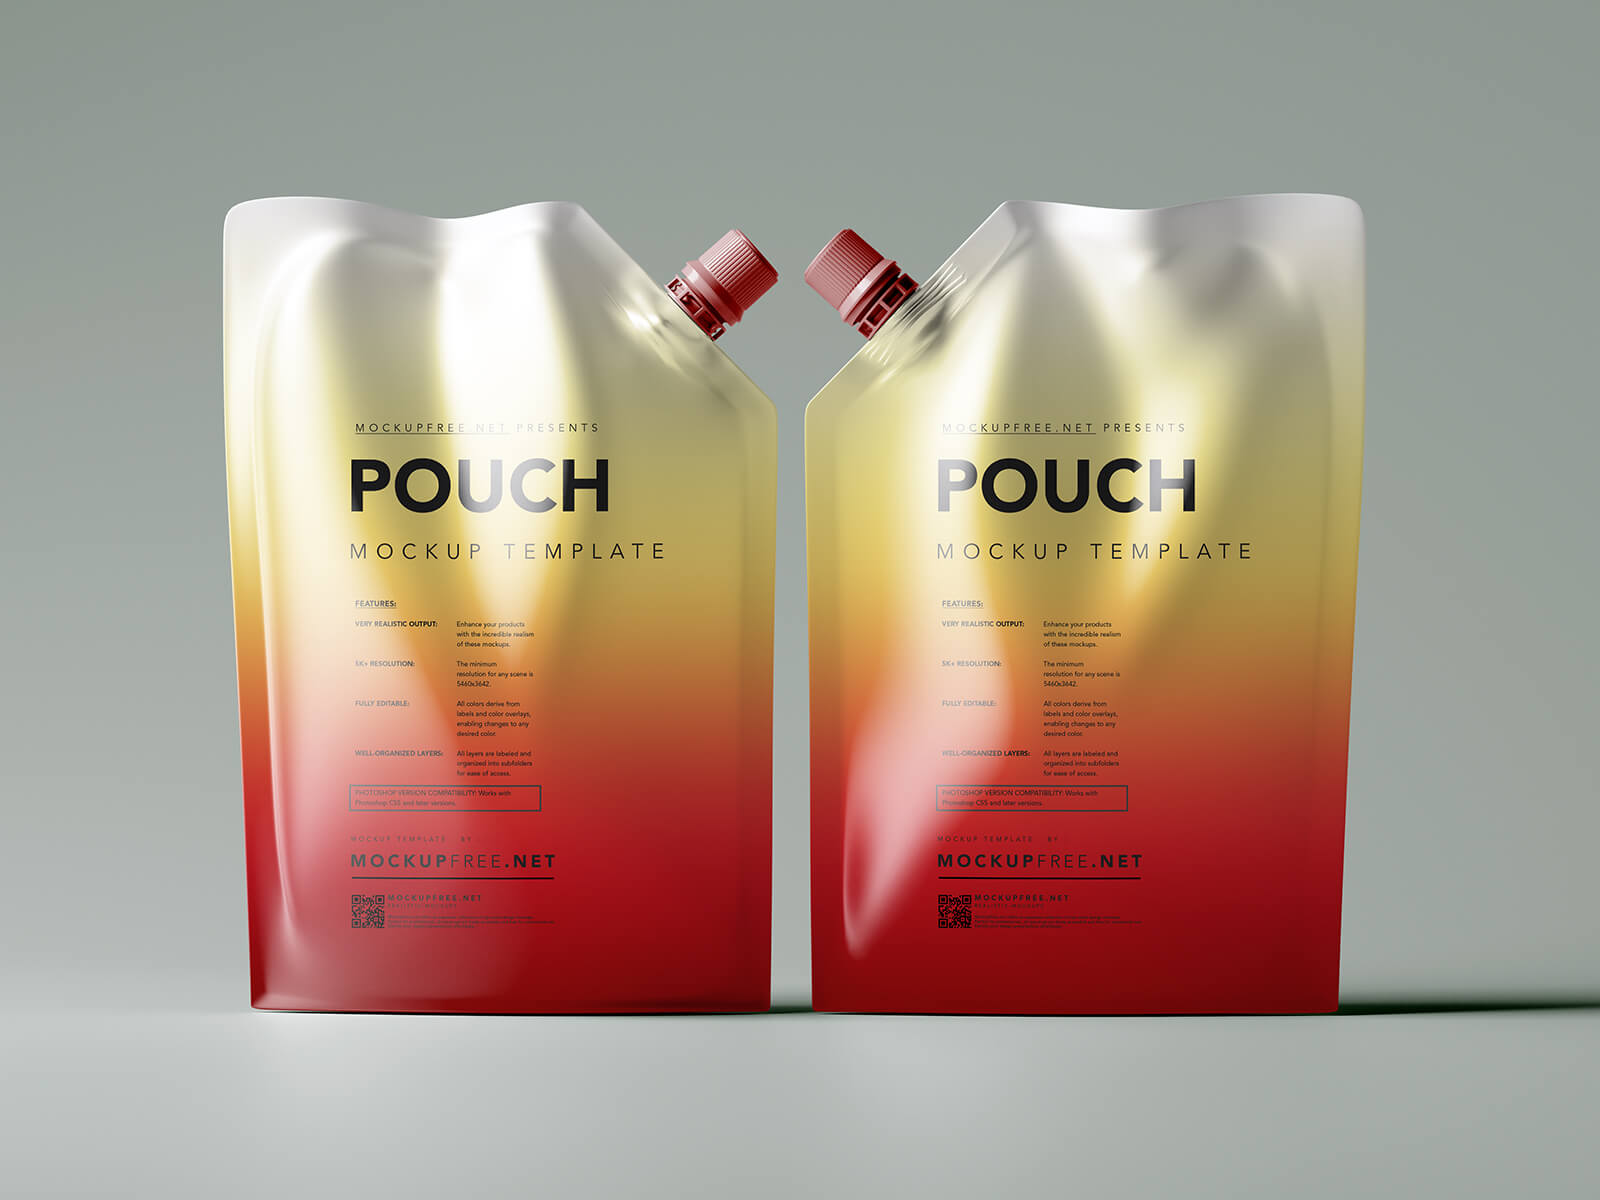 Free Plastic Spout Doypack Standup Pouch Mockup